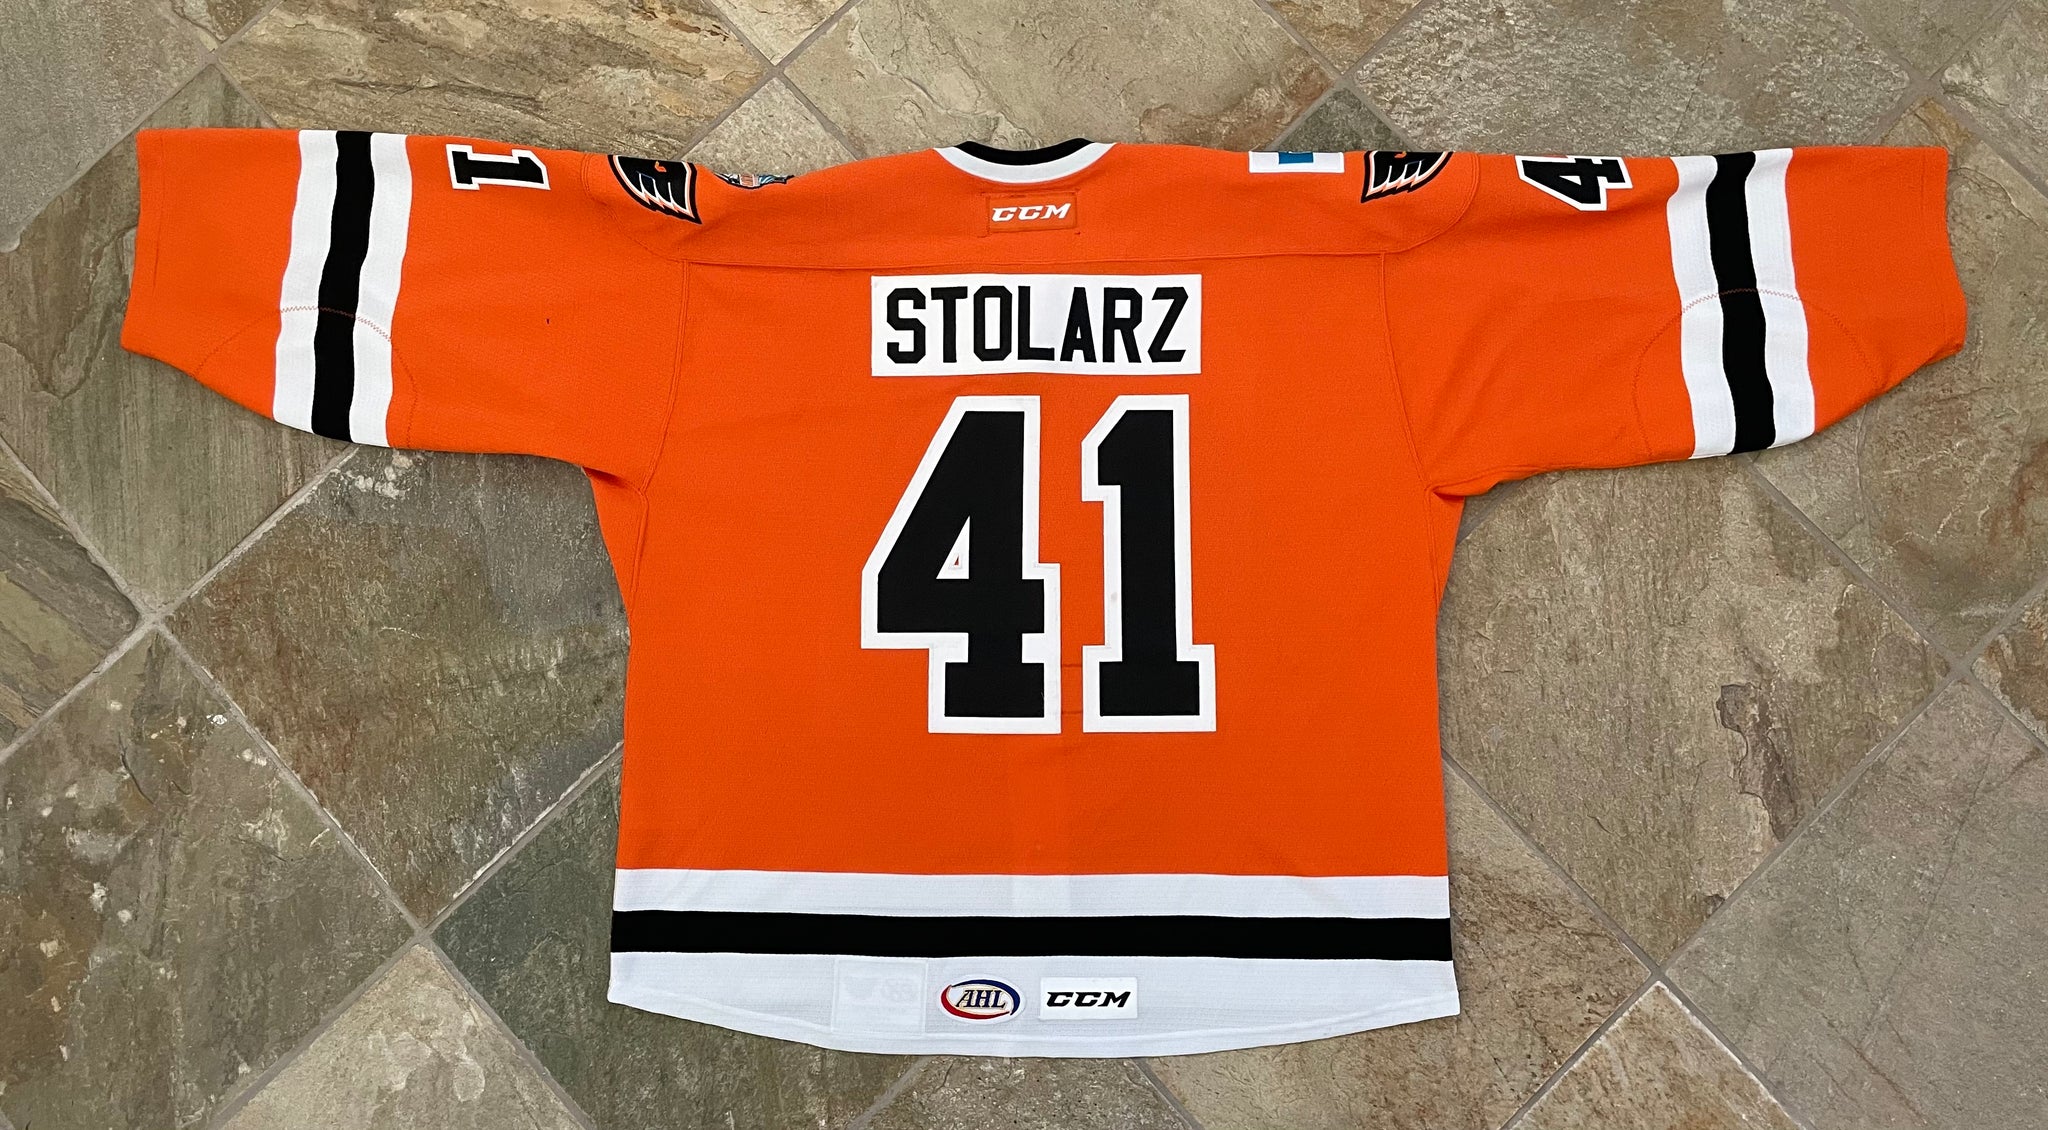 NHL Jerseys for sale in Myerstown, Pennsylvania